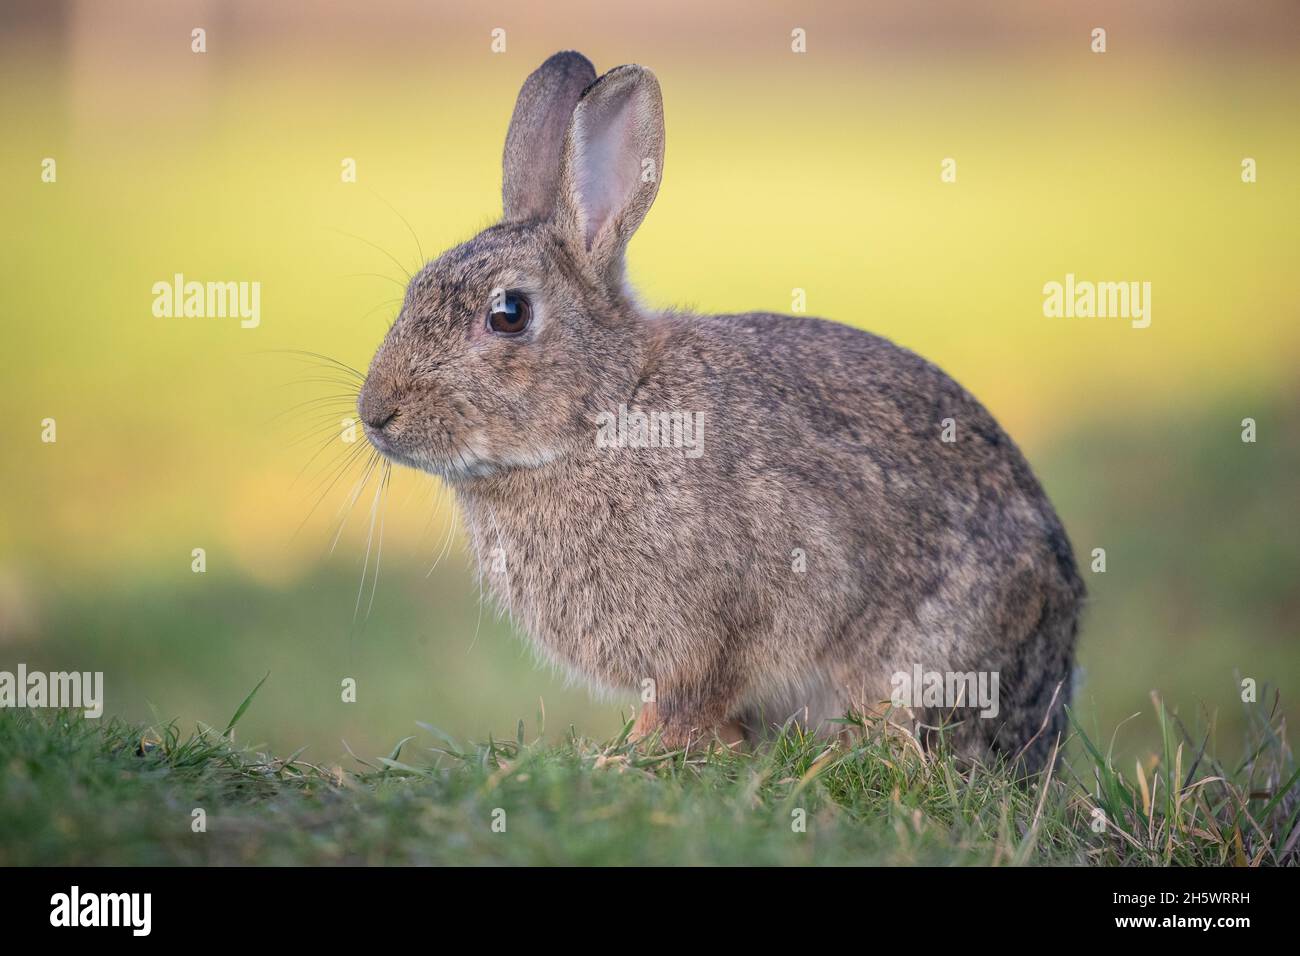 A  close up of a young Rabbit sitting on a natural but bright coloured background. Suffolk, UK Stock Photo